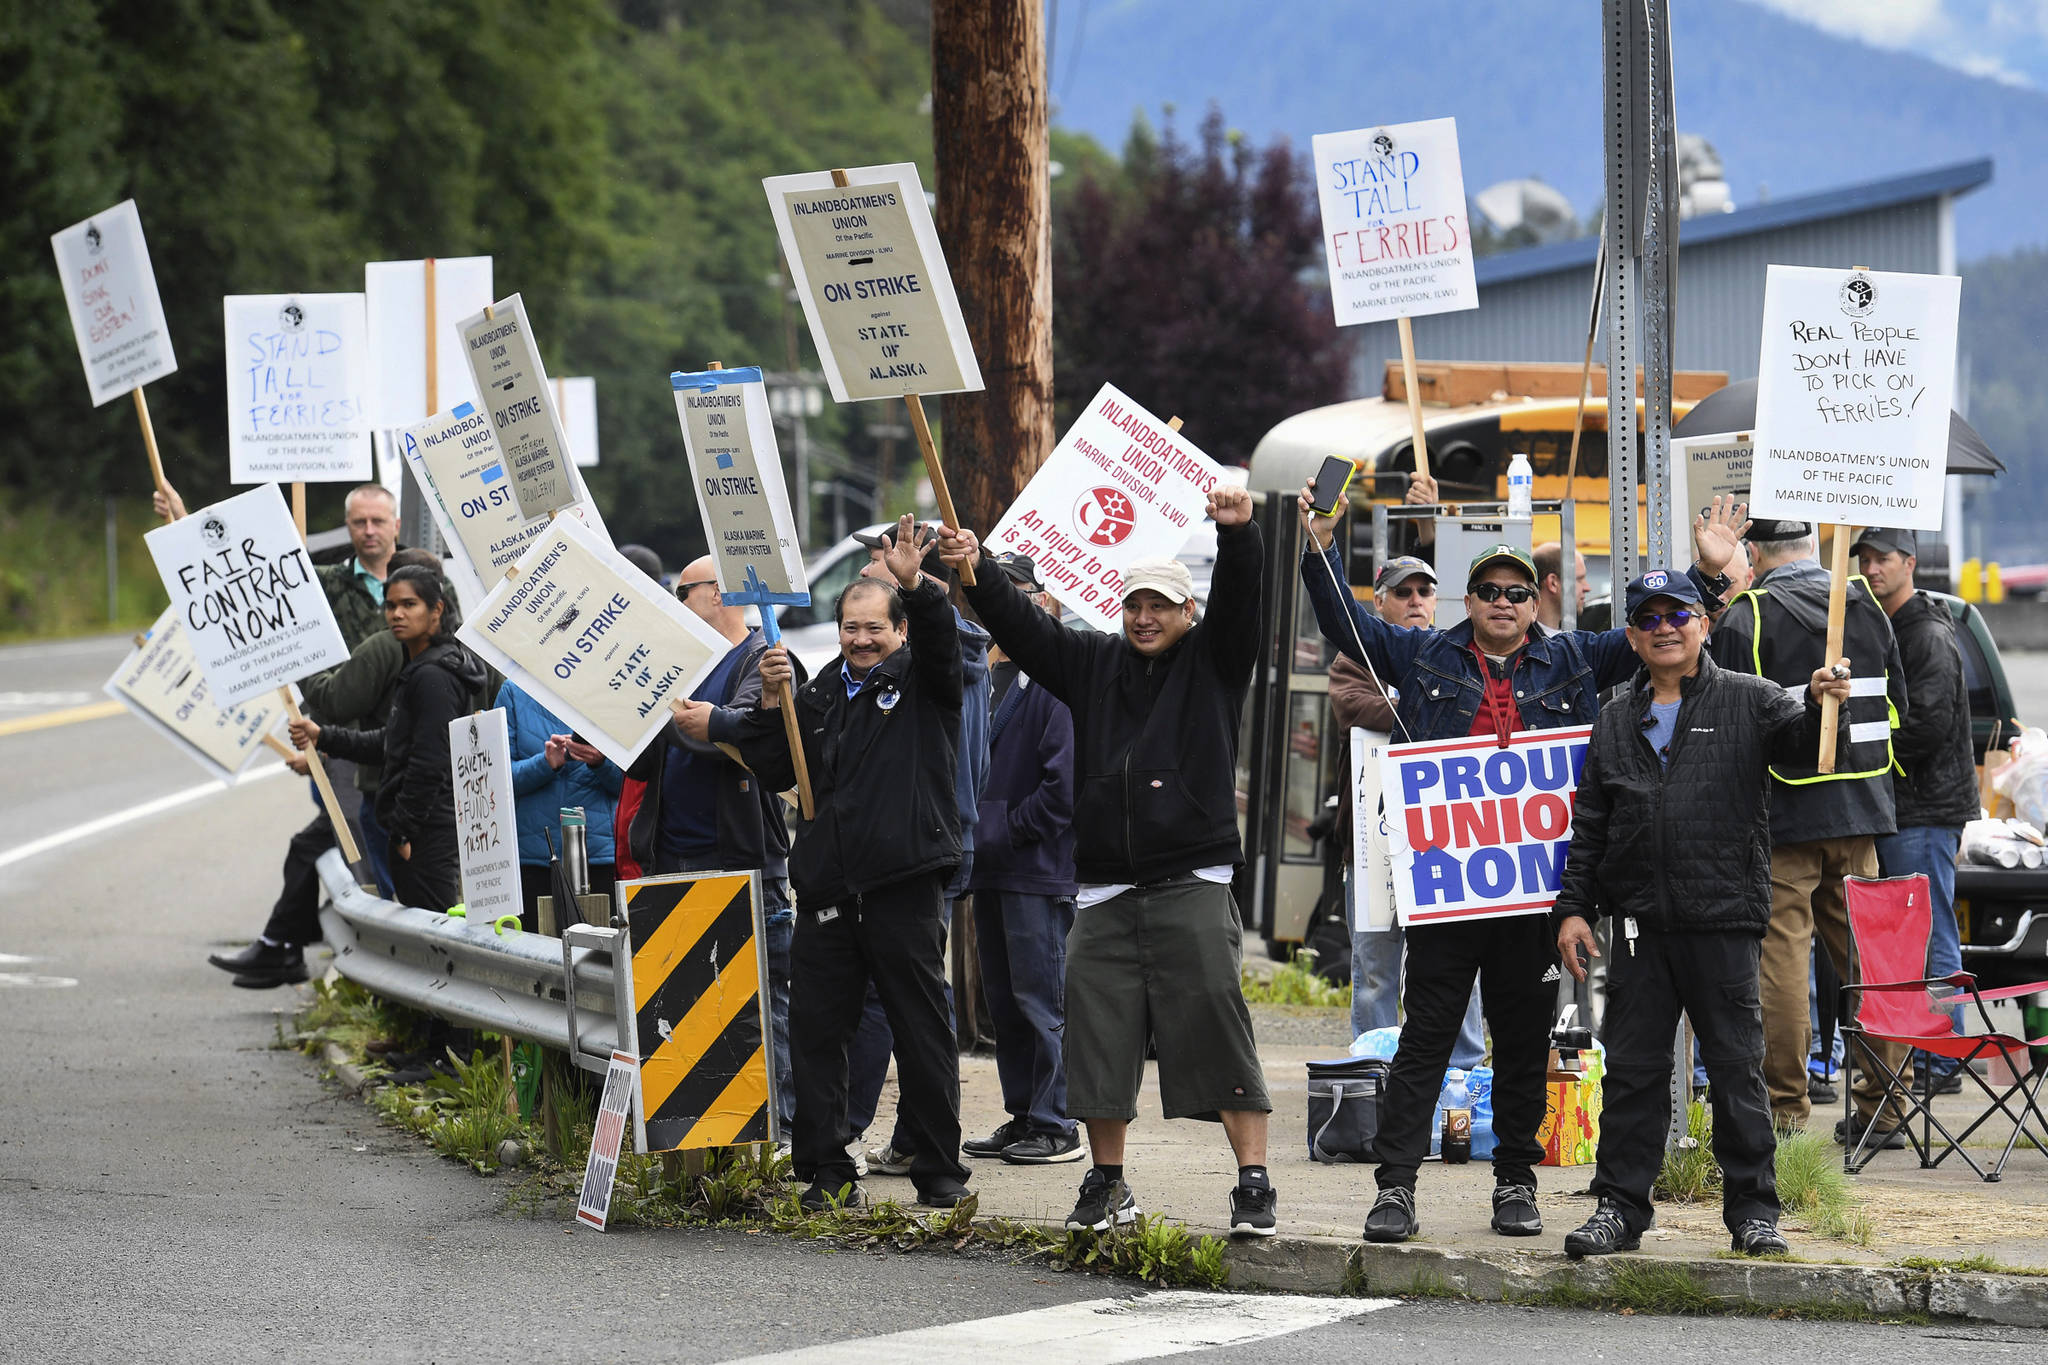 Members of the Inland Boatmen’s Union of the Pacific picket in front of the Auke Bay Terminal in Juneau, Alaska, Thursday, July 25, 2019. The union called a strike on Wednesday over failed negotiations with Gov. Mike Dunleavy’s administration. State officials said Thursday more than $580,000 in fares has been refunded to passengers affected by striking ferry workers. (Michael Penn/The Juneau Empire via AP)